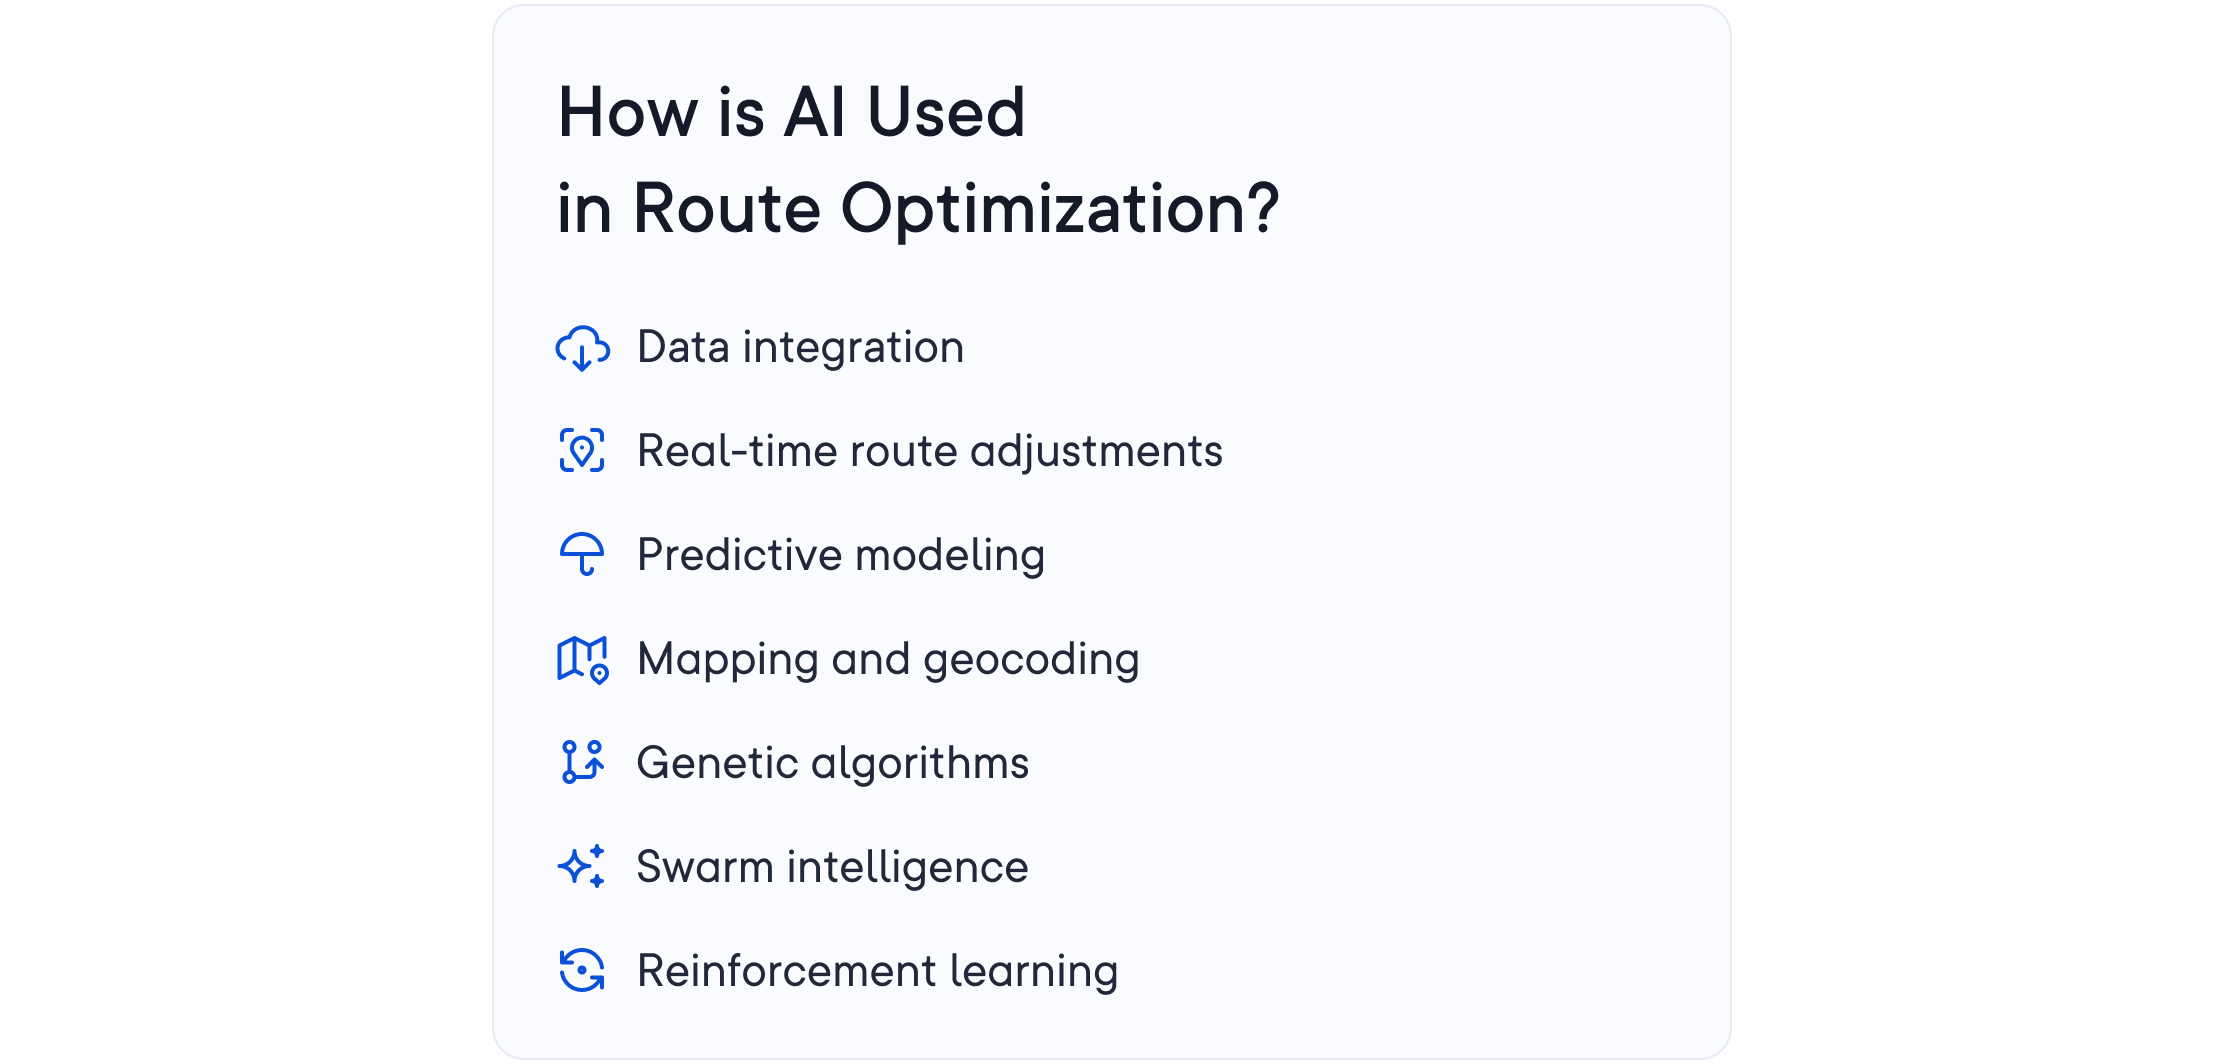 A list of the different ways AI is used in route optimization